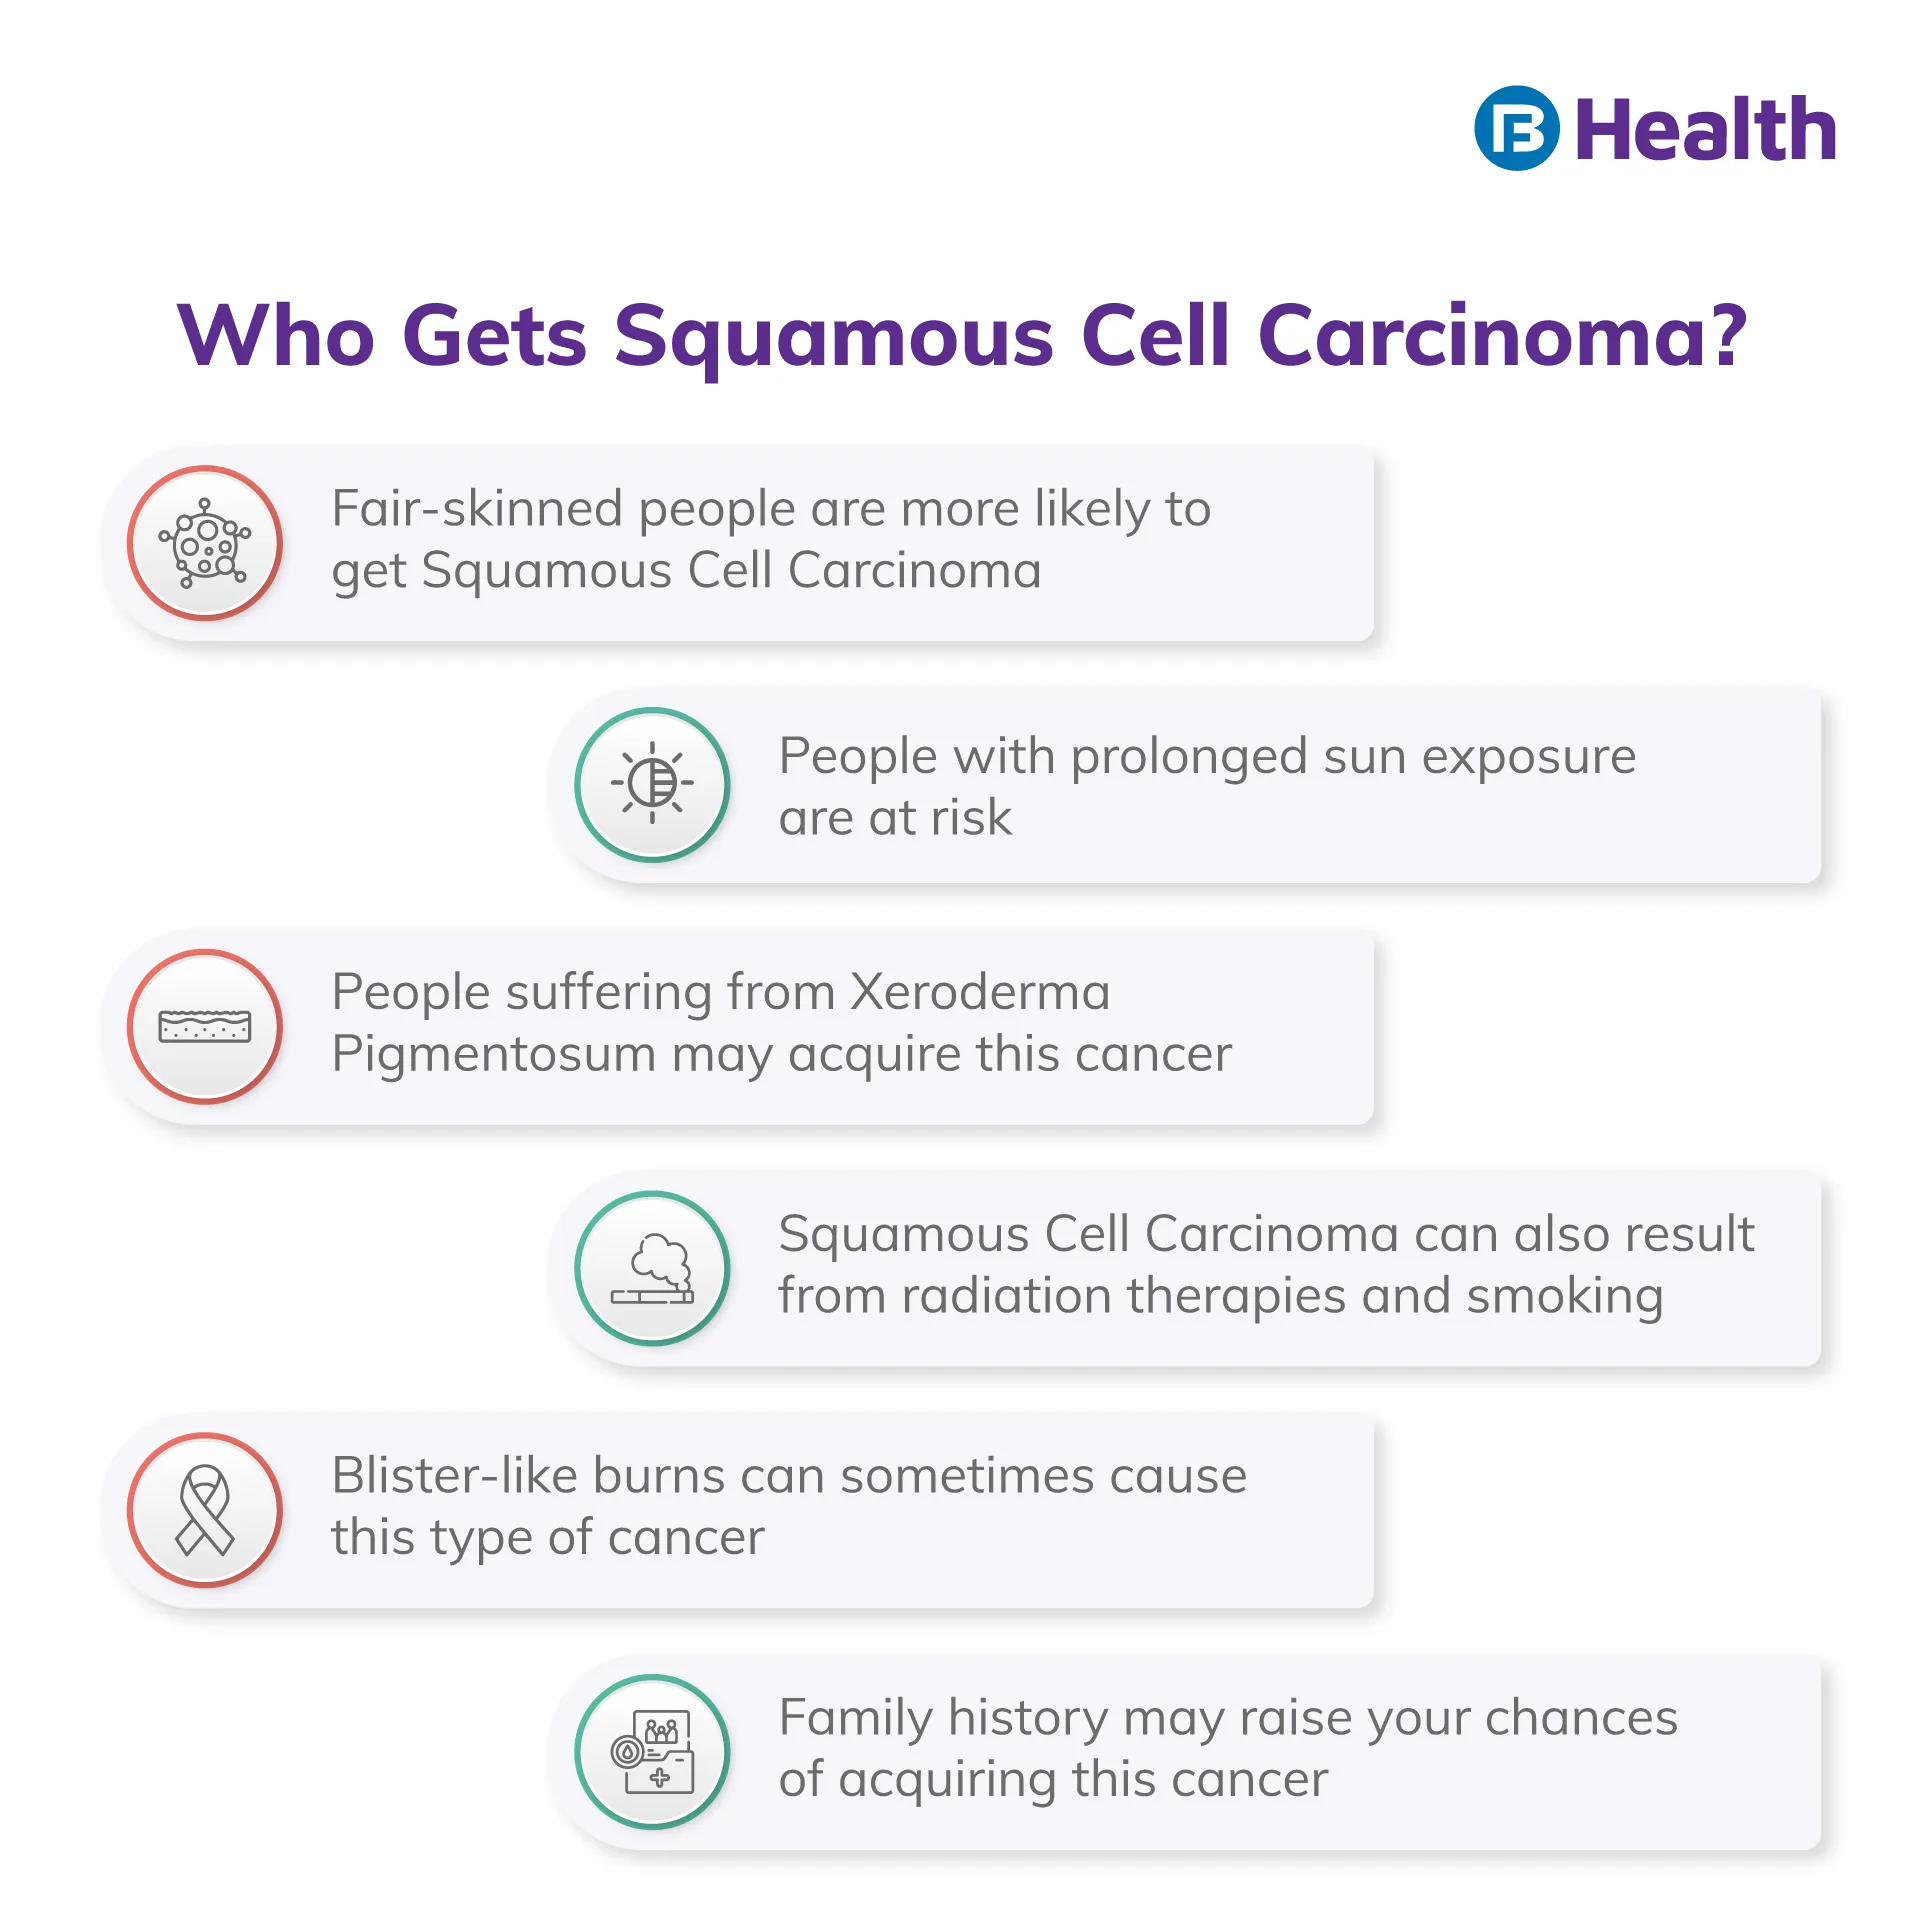 who gets Squamous Cell Carcinoma